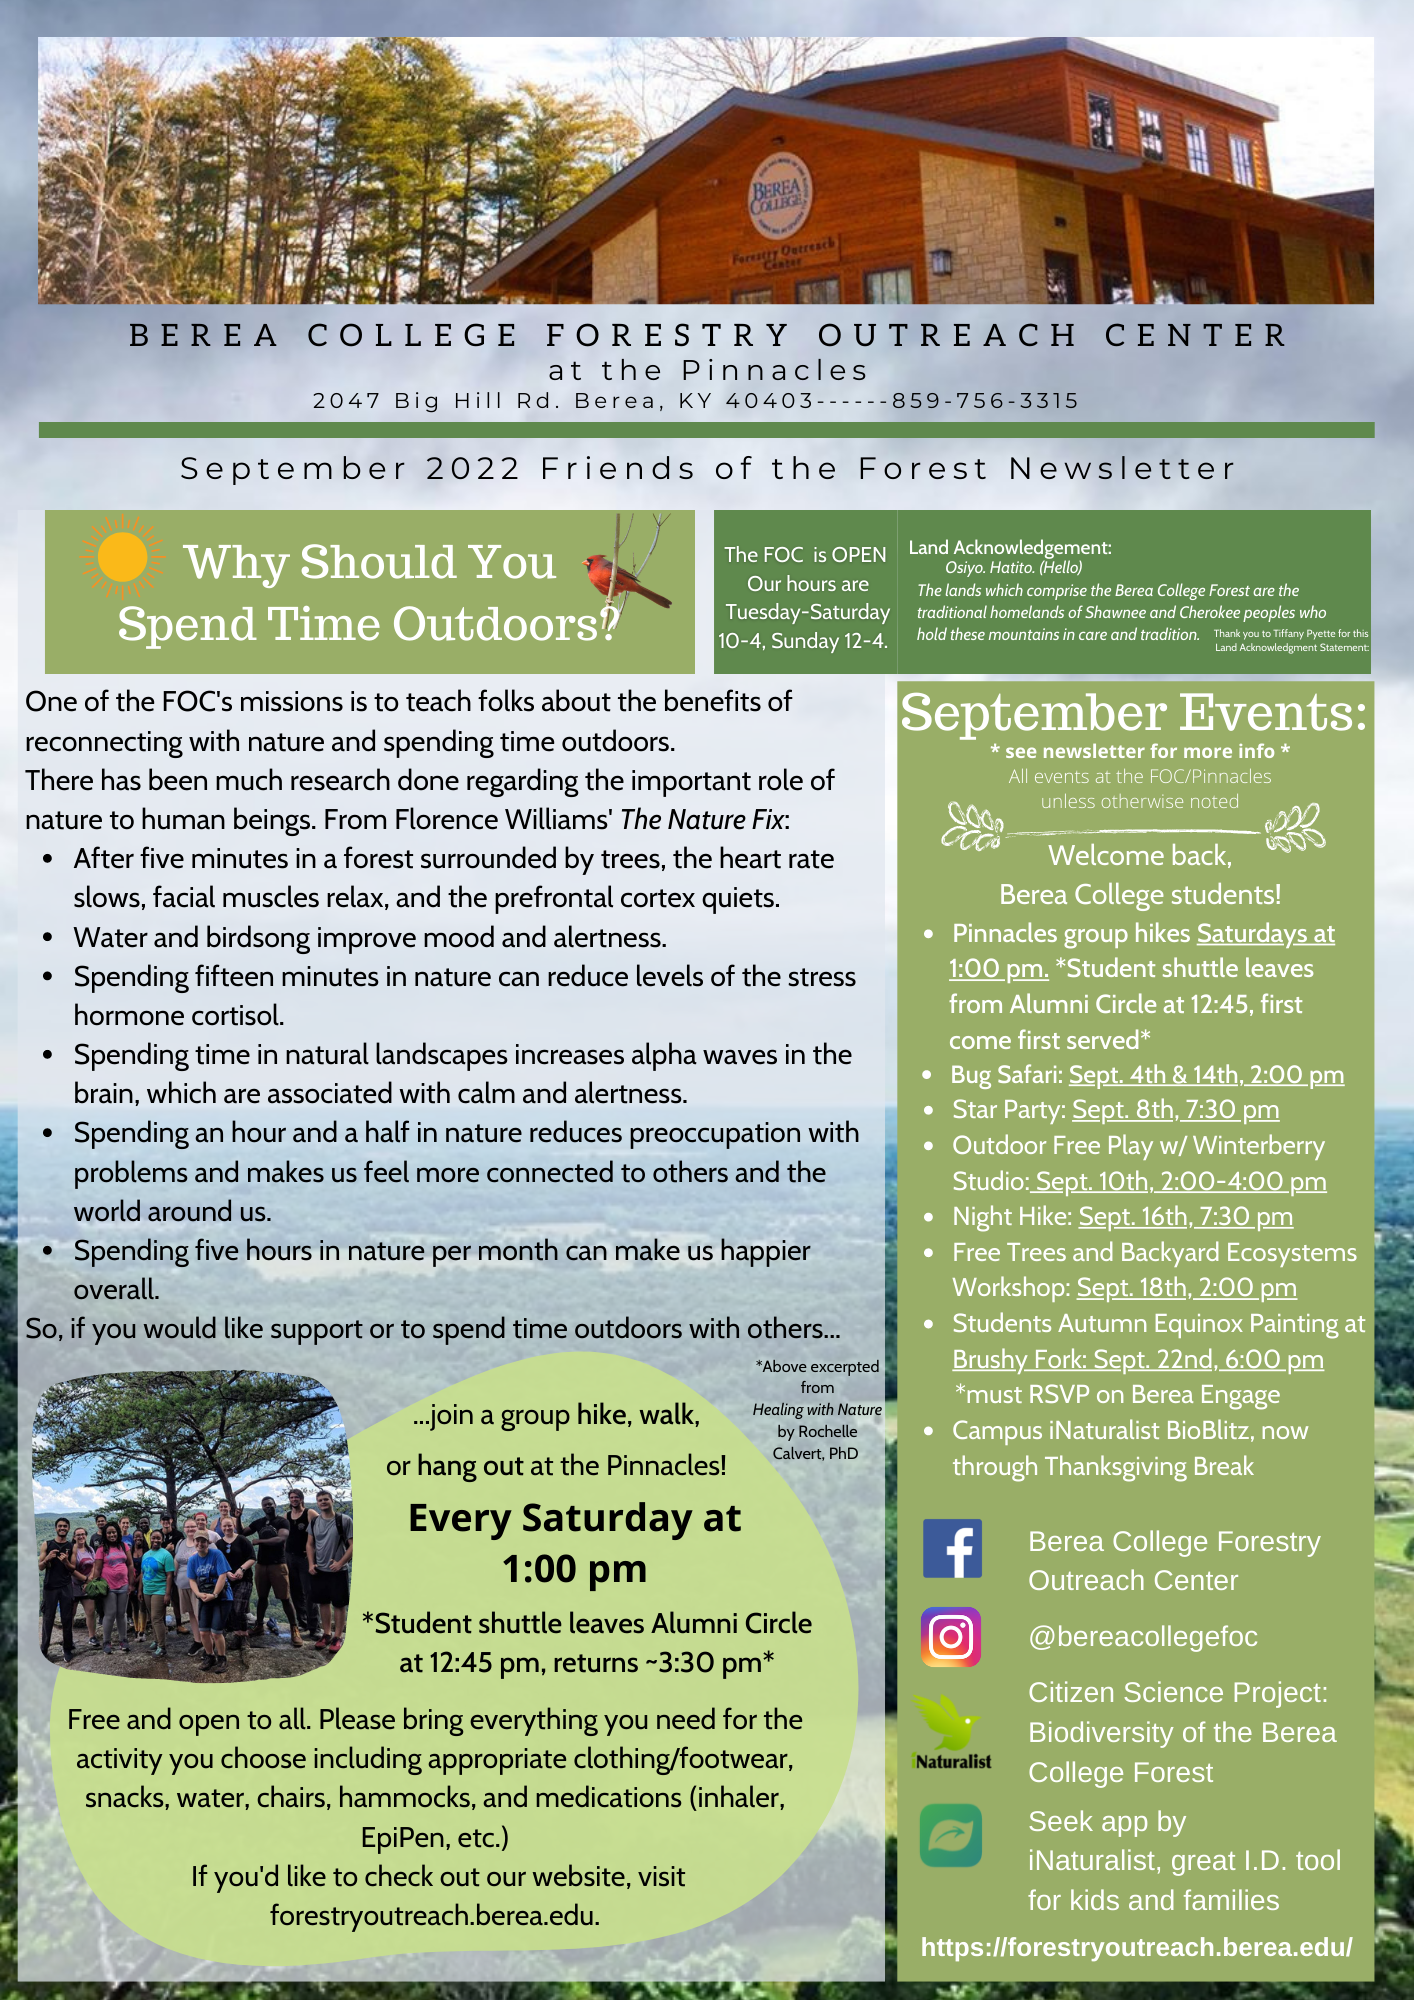 Page 1 of the September 2022 Forestry Outreach Center newsletter